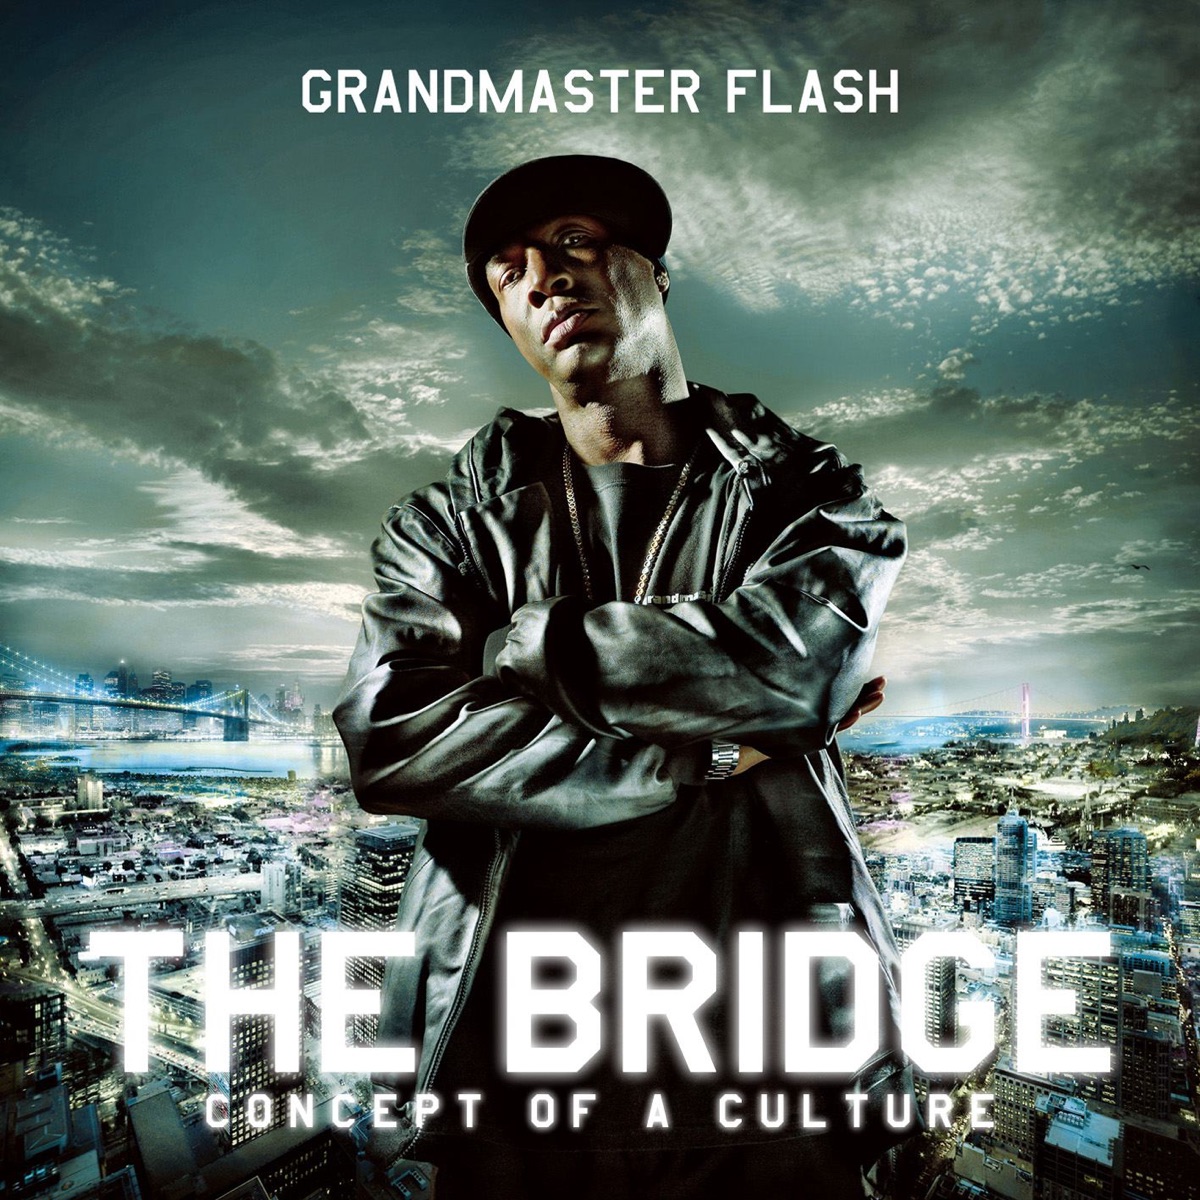 100 Greatest Songs of the 80's #64 Grandmaster Flash & The Furious